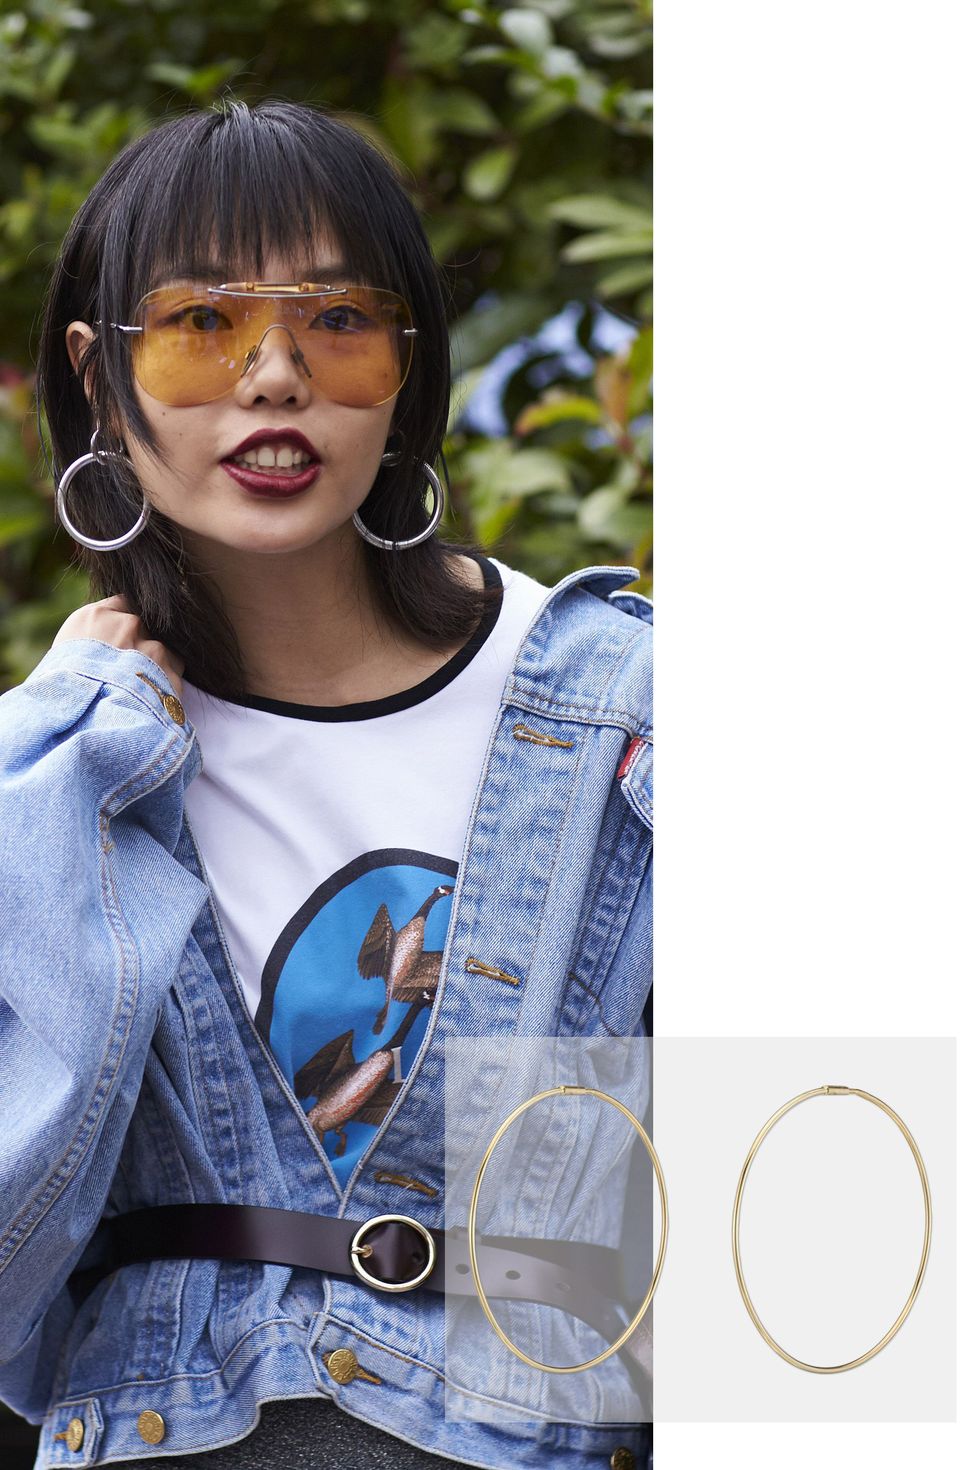 <p>"I've been seeing a lot of heavy, gold pieces," says Los Angeles-based jewelry designer Ariel Gordon Maffei. "It isn't really about a thin little whisper of gold anymore; it's more about big, Jenny-from-the-block hoop earrings. More is more. Pile it all on." </p>

<p><em data-redactor-tag="em" data-verified="redactor">Ariel Gordon Standard Endless Hoop, $795; </em><a href="https://www.arielgordonjewelry.com/collections/new-additions/products/standard-endless-hoop" target="_blank" data-tracking-id="recirc-text-link"><em data-redactor-tag="em" data-verified="redactor">arielgordon.com</em></a></p>